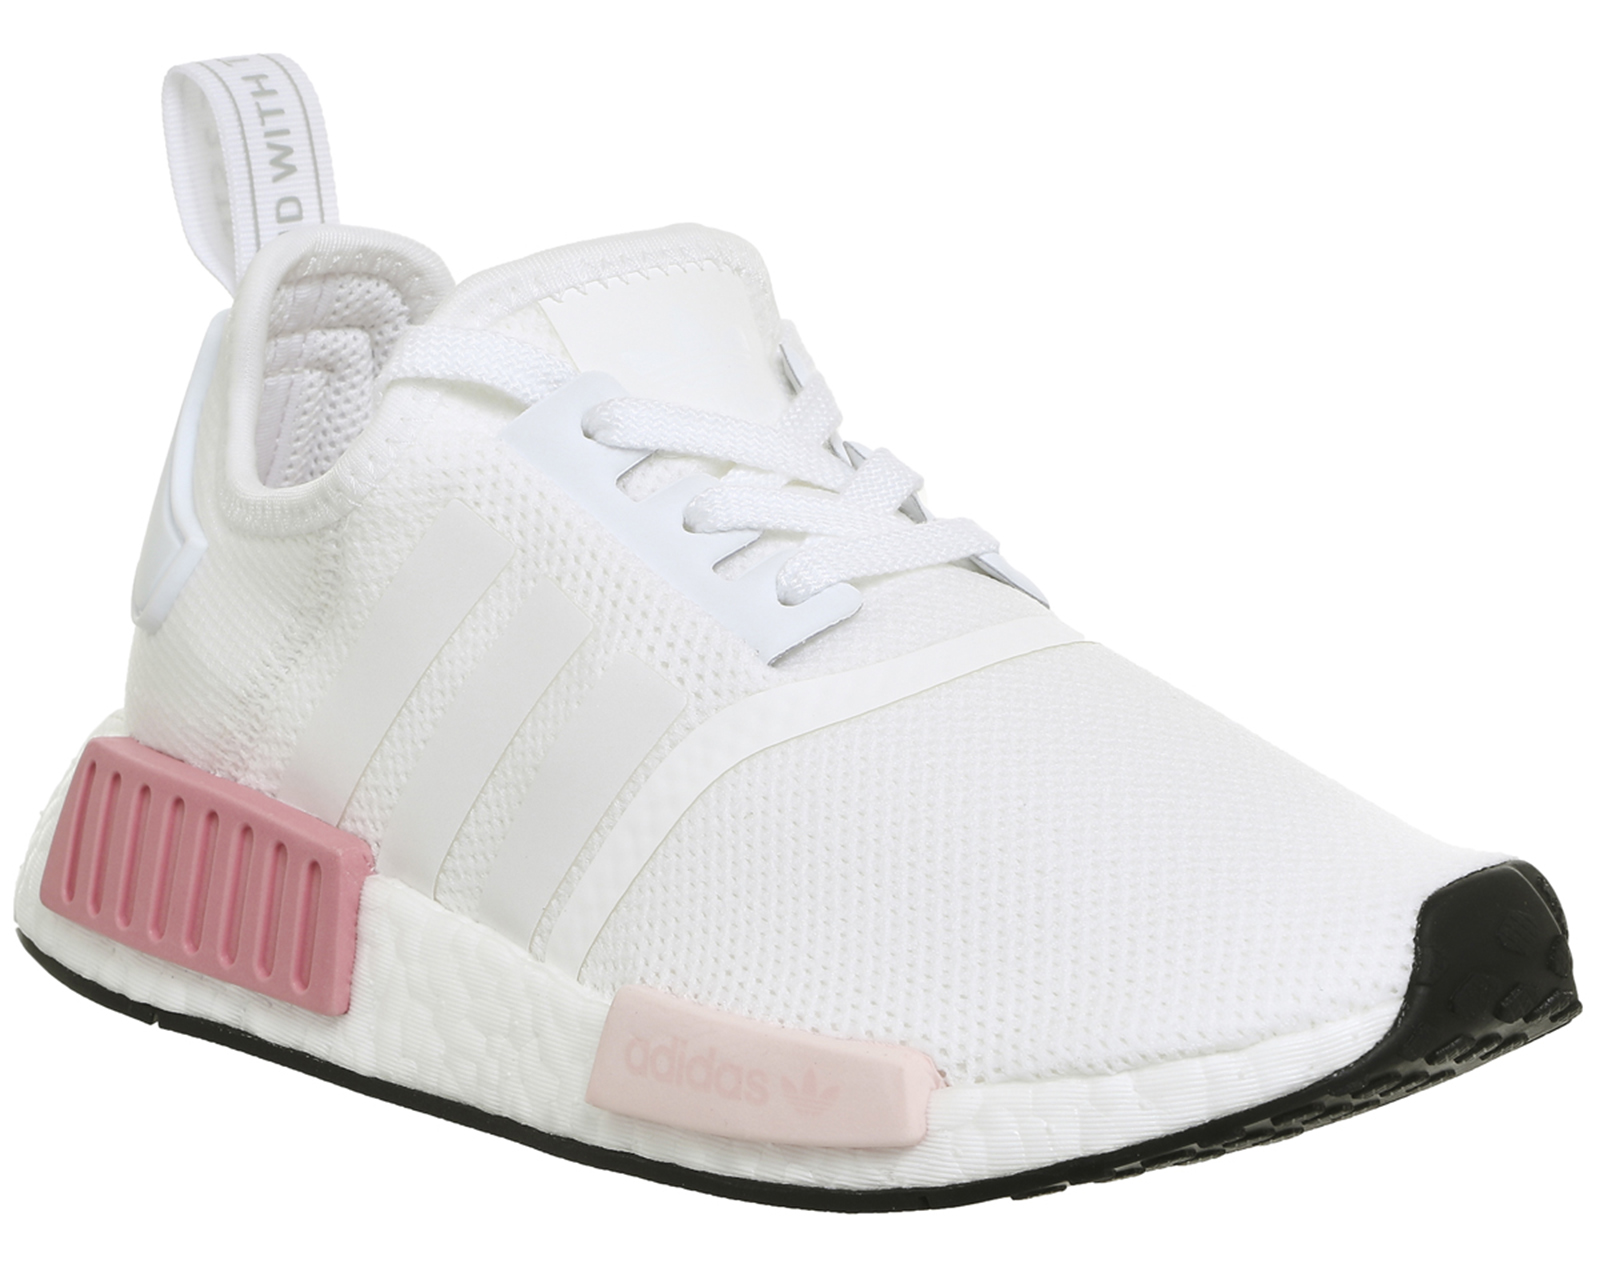 adidas Nmd R1 White Icey Pink - His 